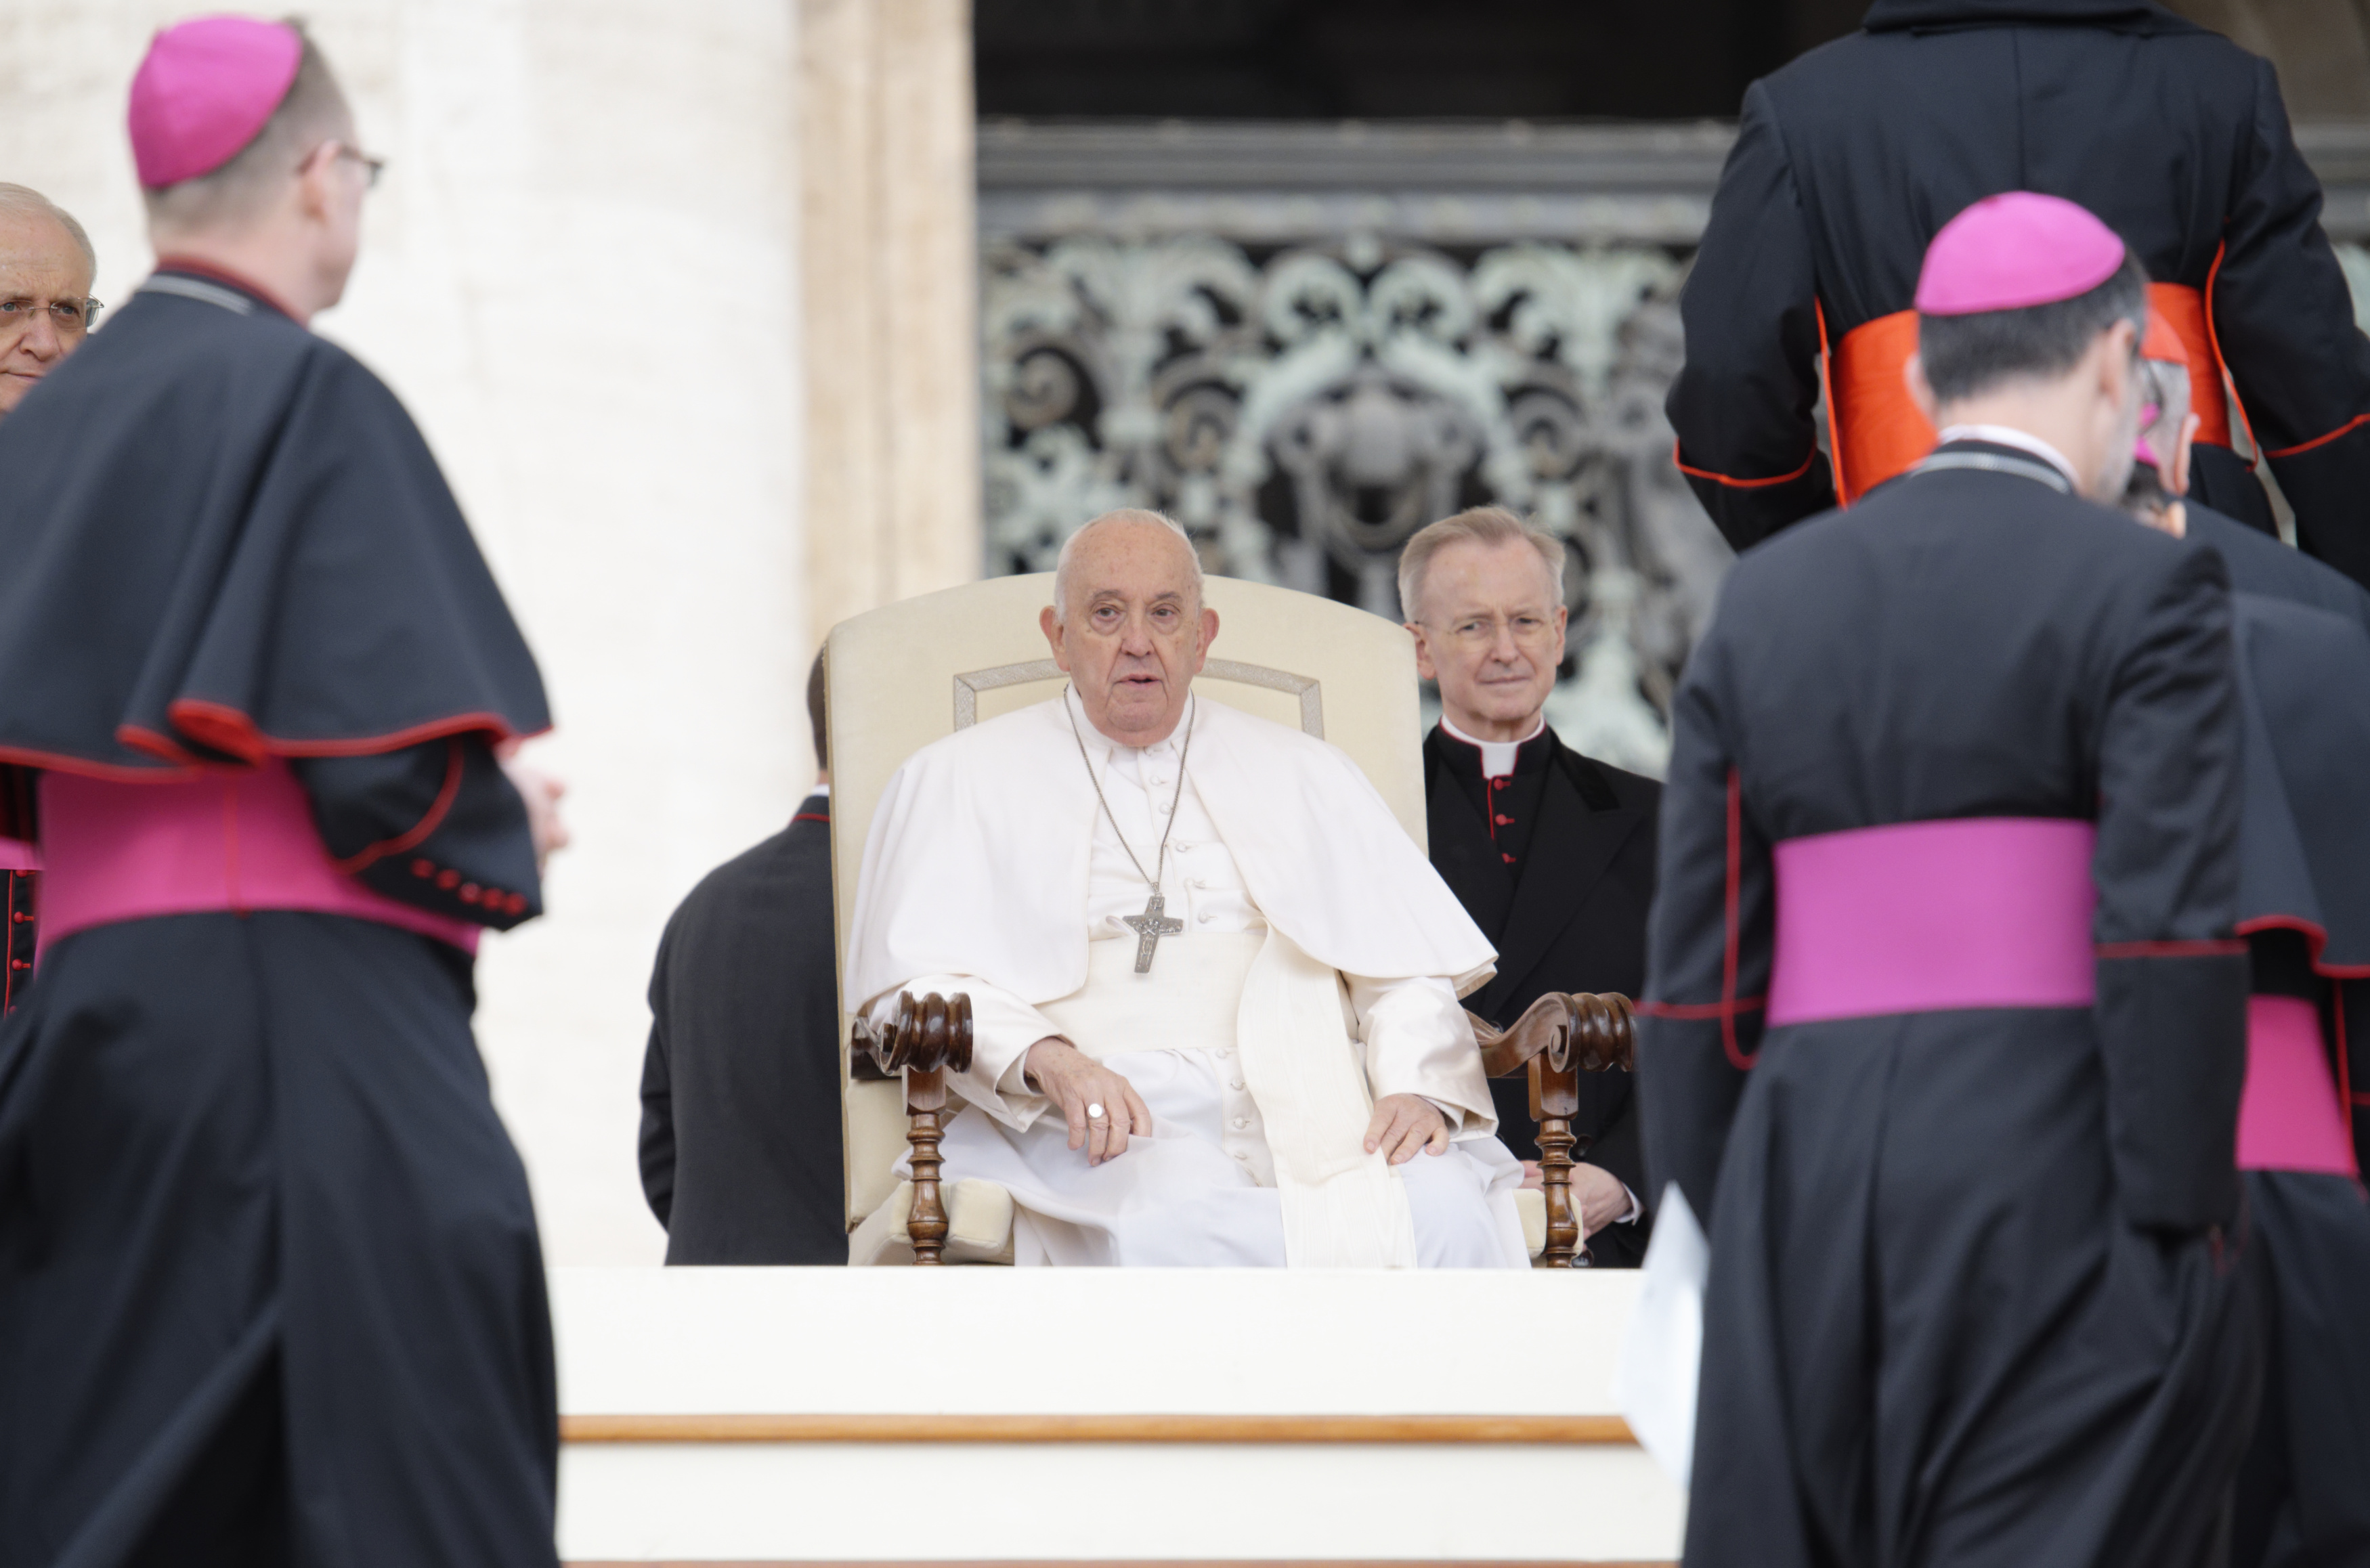 Bishops pass by Pop Francis, who is sitting in a large chair.